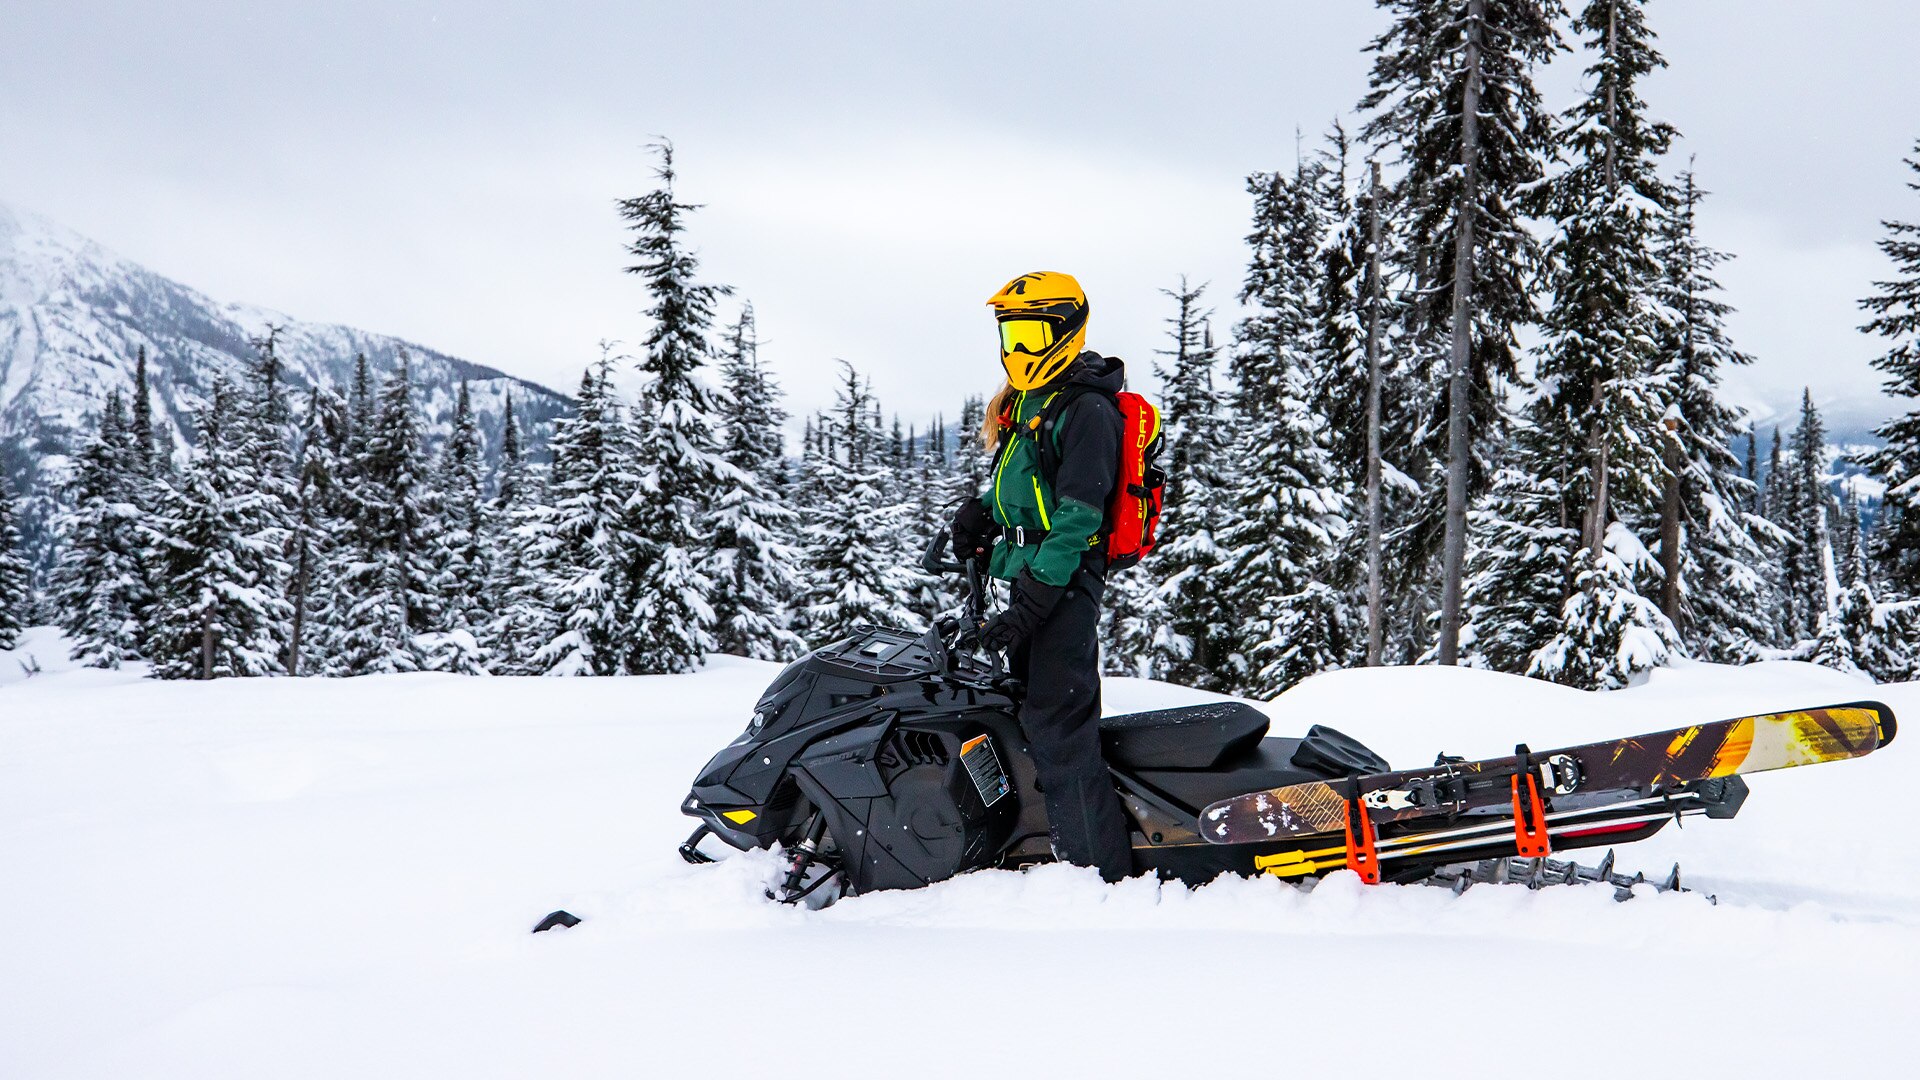 Rider standing up on this Ski-Doo snowmobile in deep snow